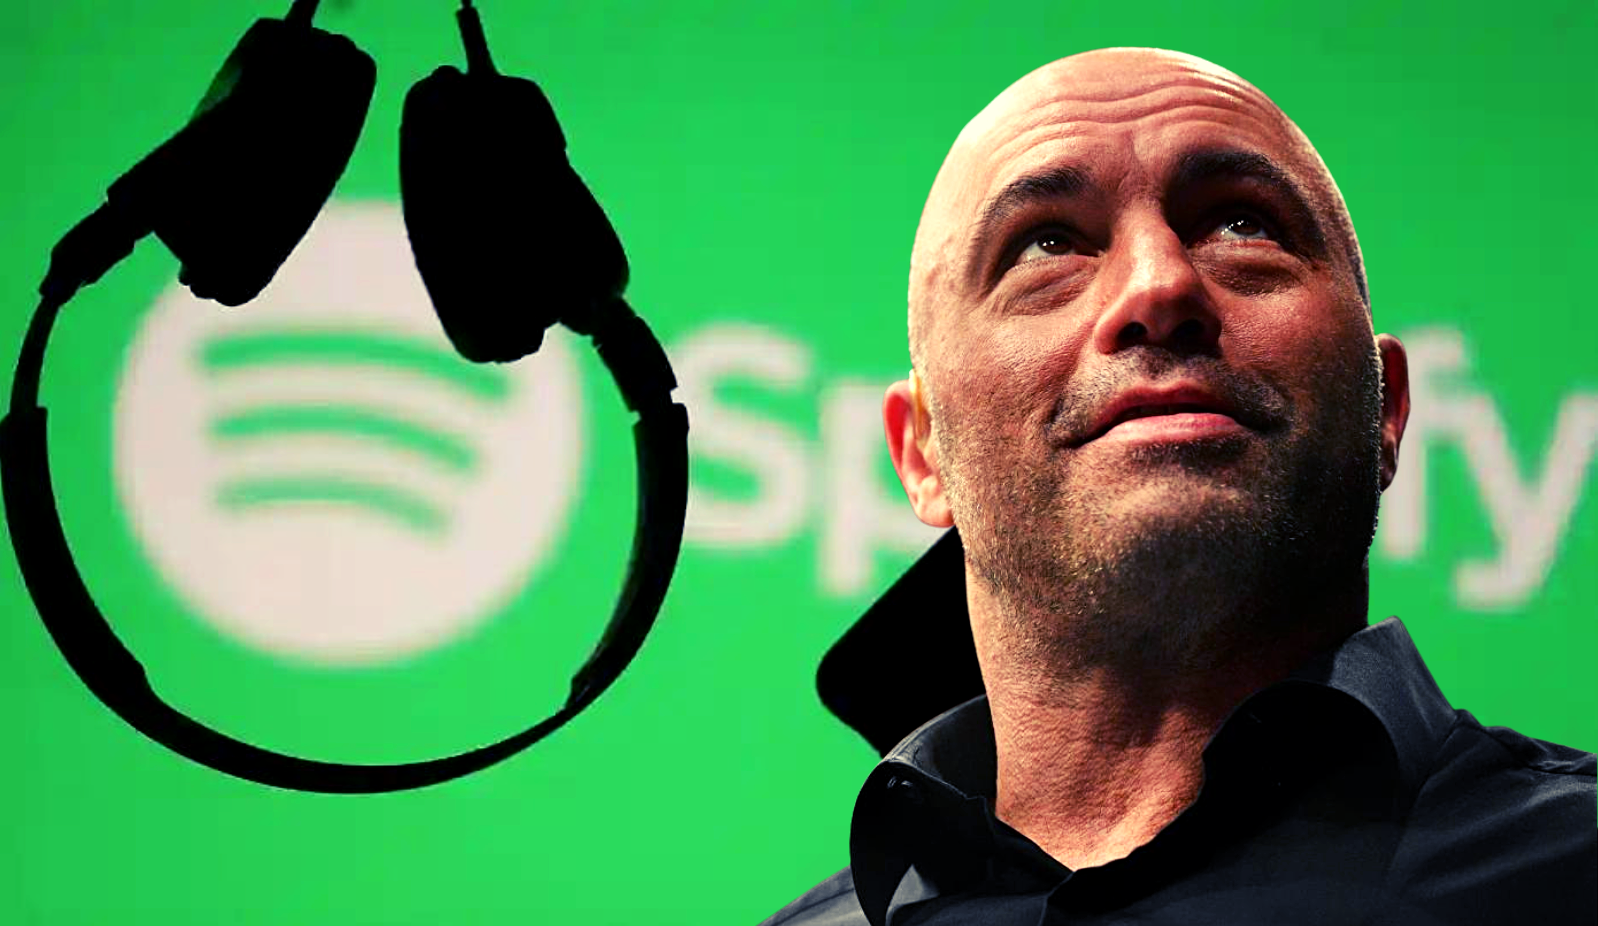 Joe Rogan Says He Gained “Over 2 Million Subscribers” After Cancel Attempt